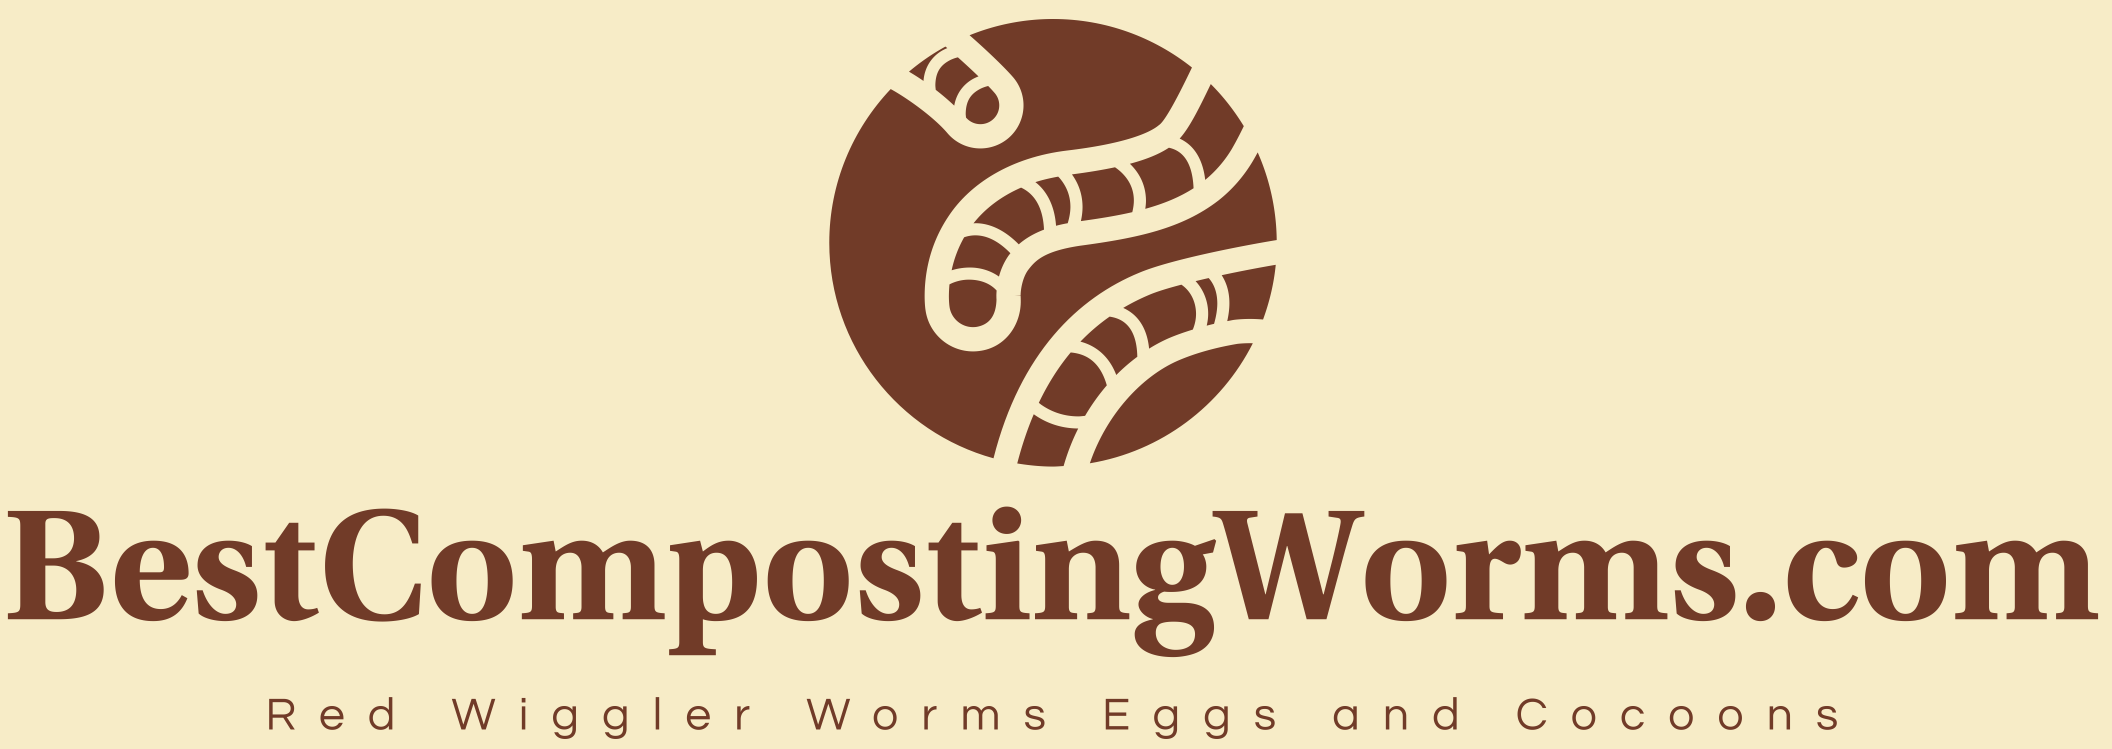 Best Composting Worms